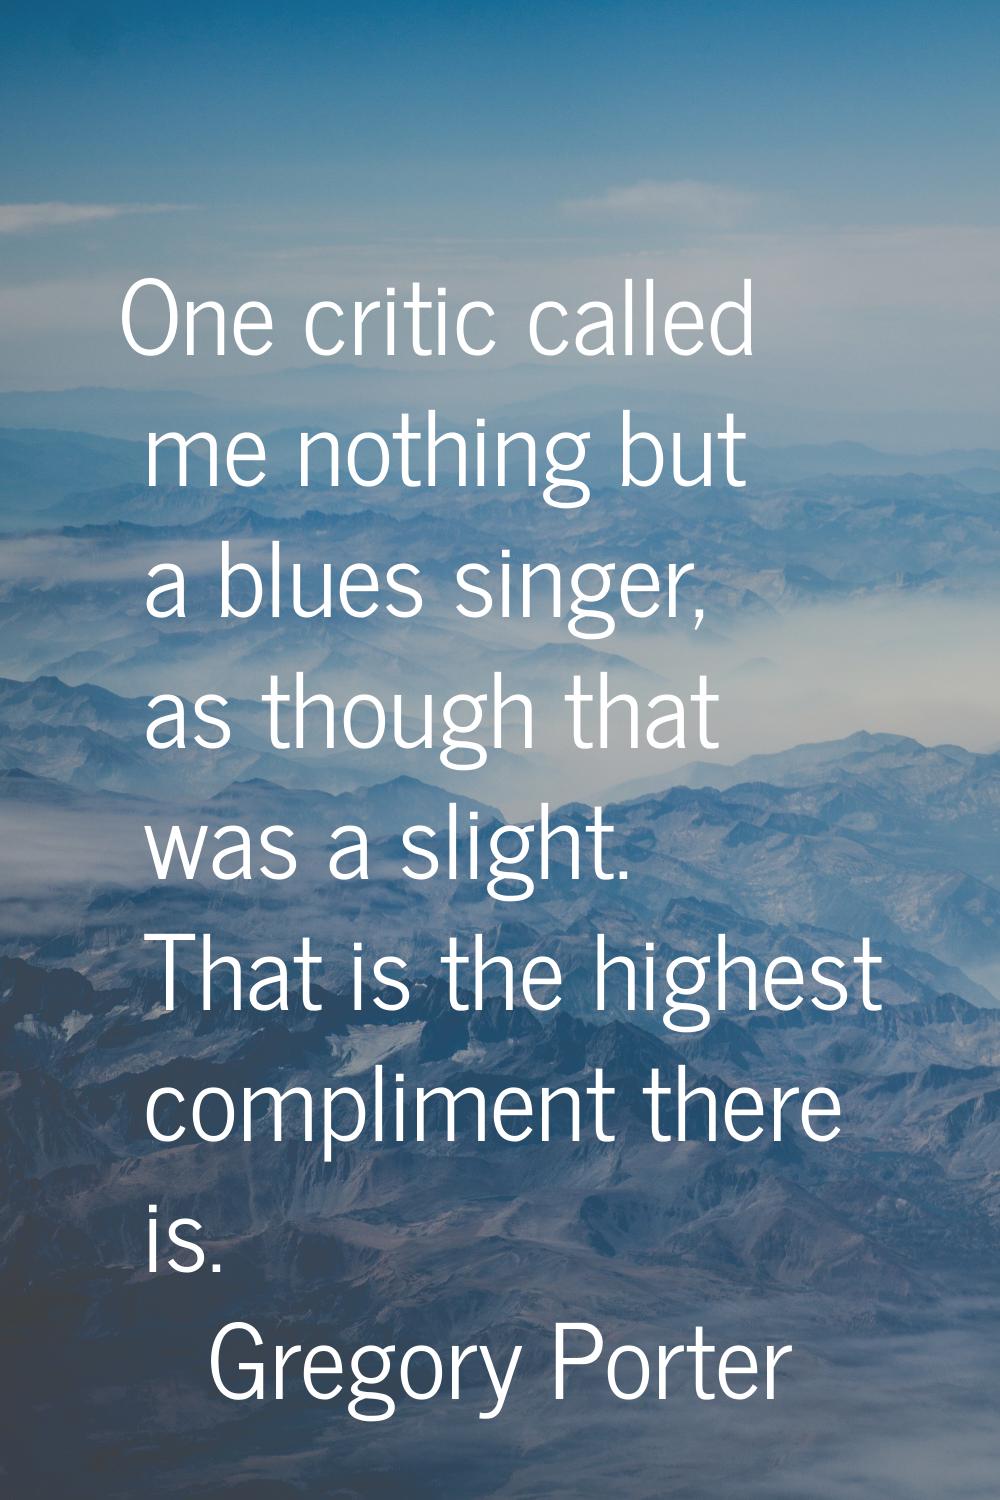 One critic called me nothing but a blues singer, as though that was a slight. That is the highest c